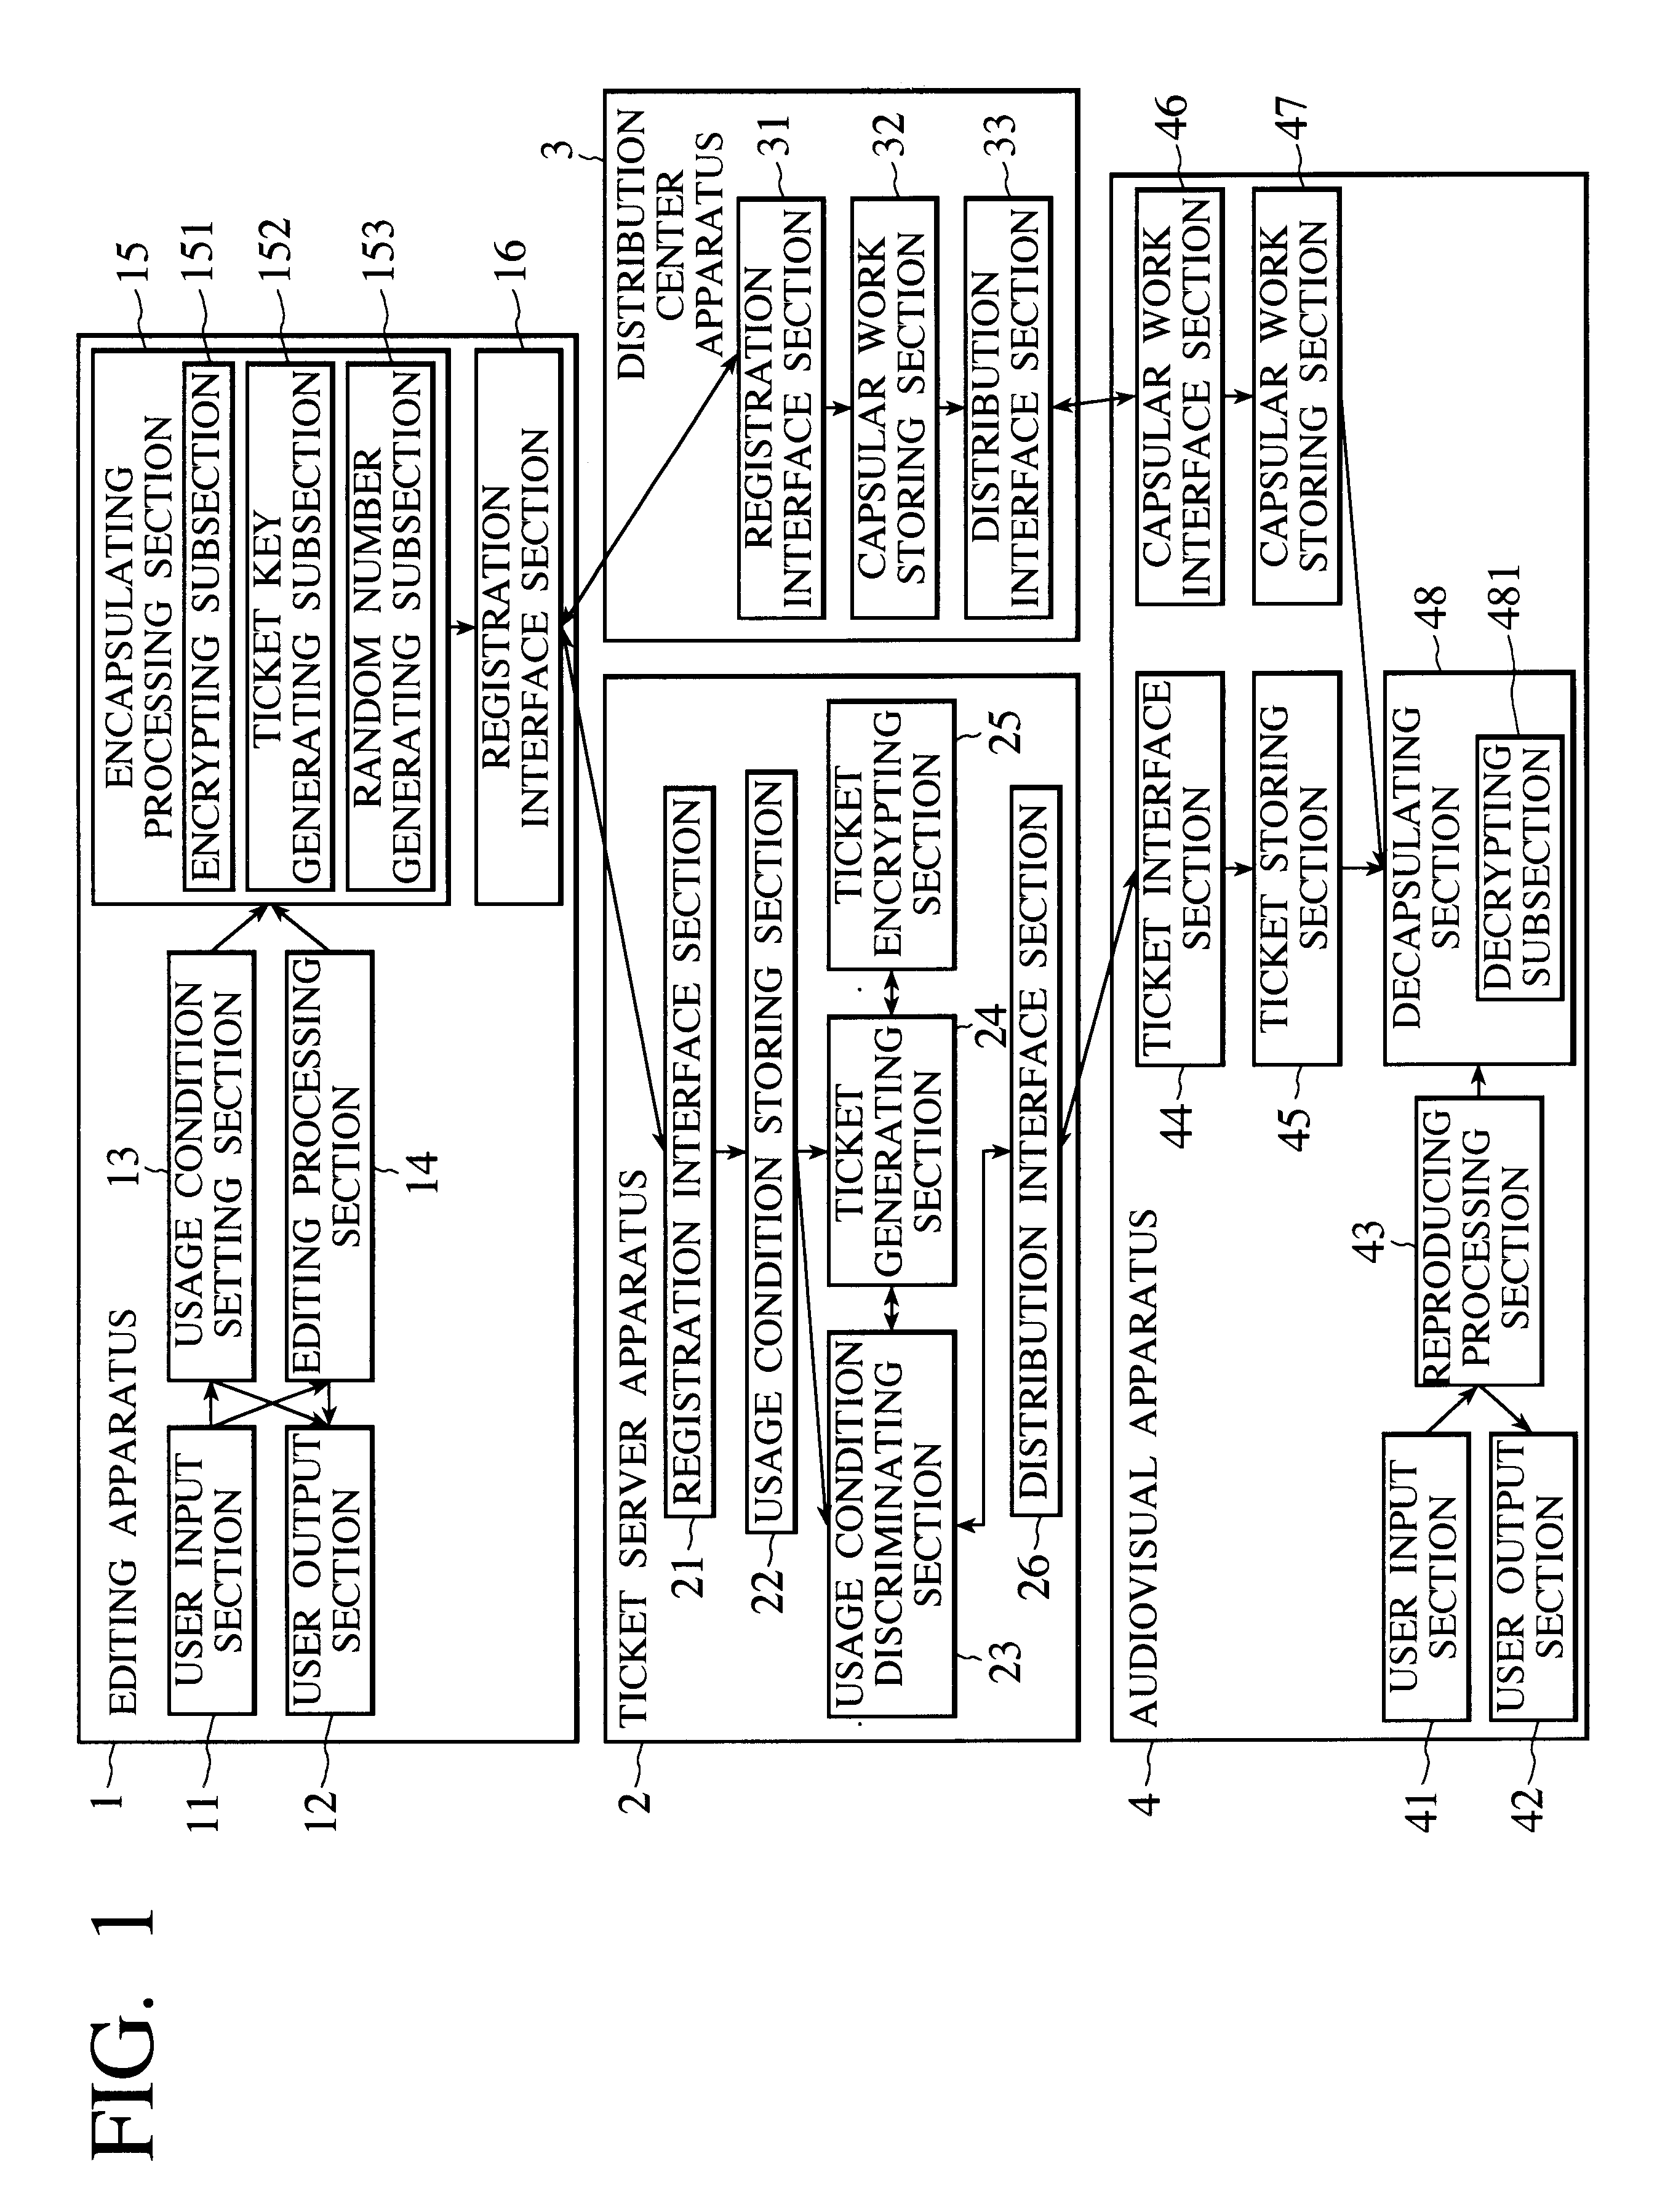 System and method for distributing digital works, apparatus and method for reproducing digital works, and computer program product